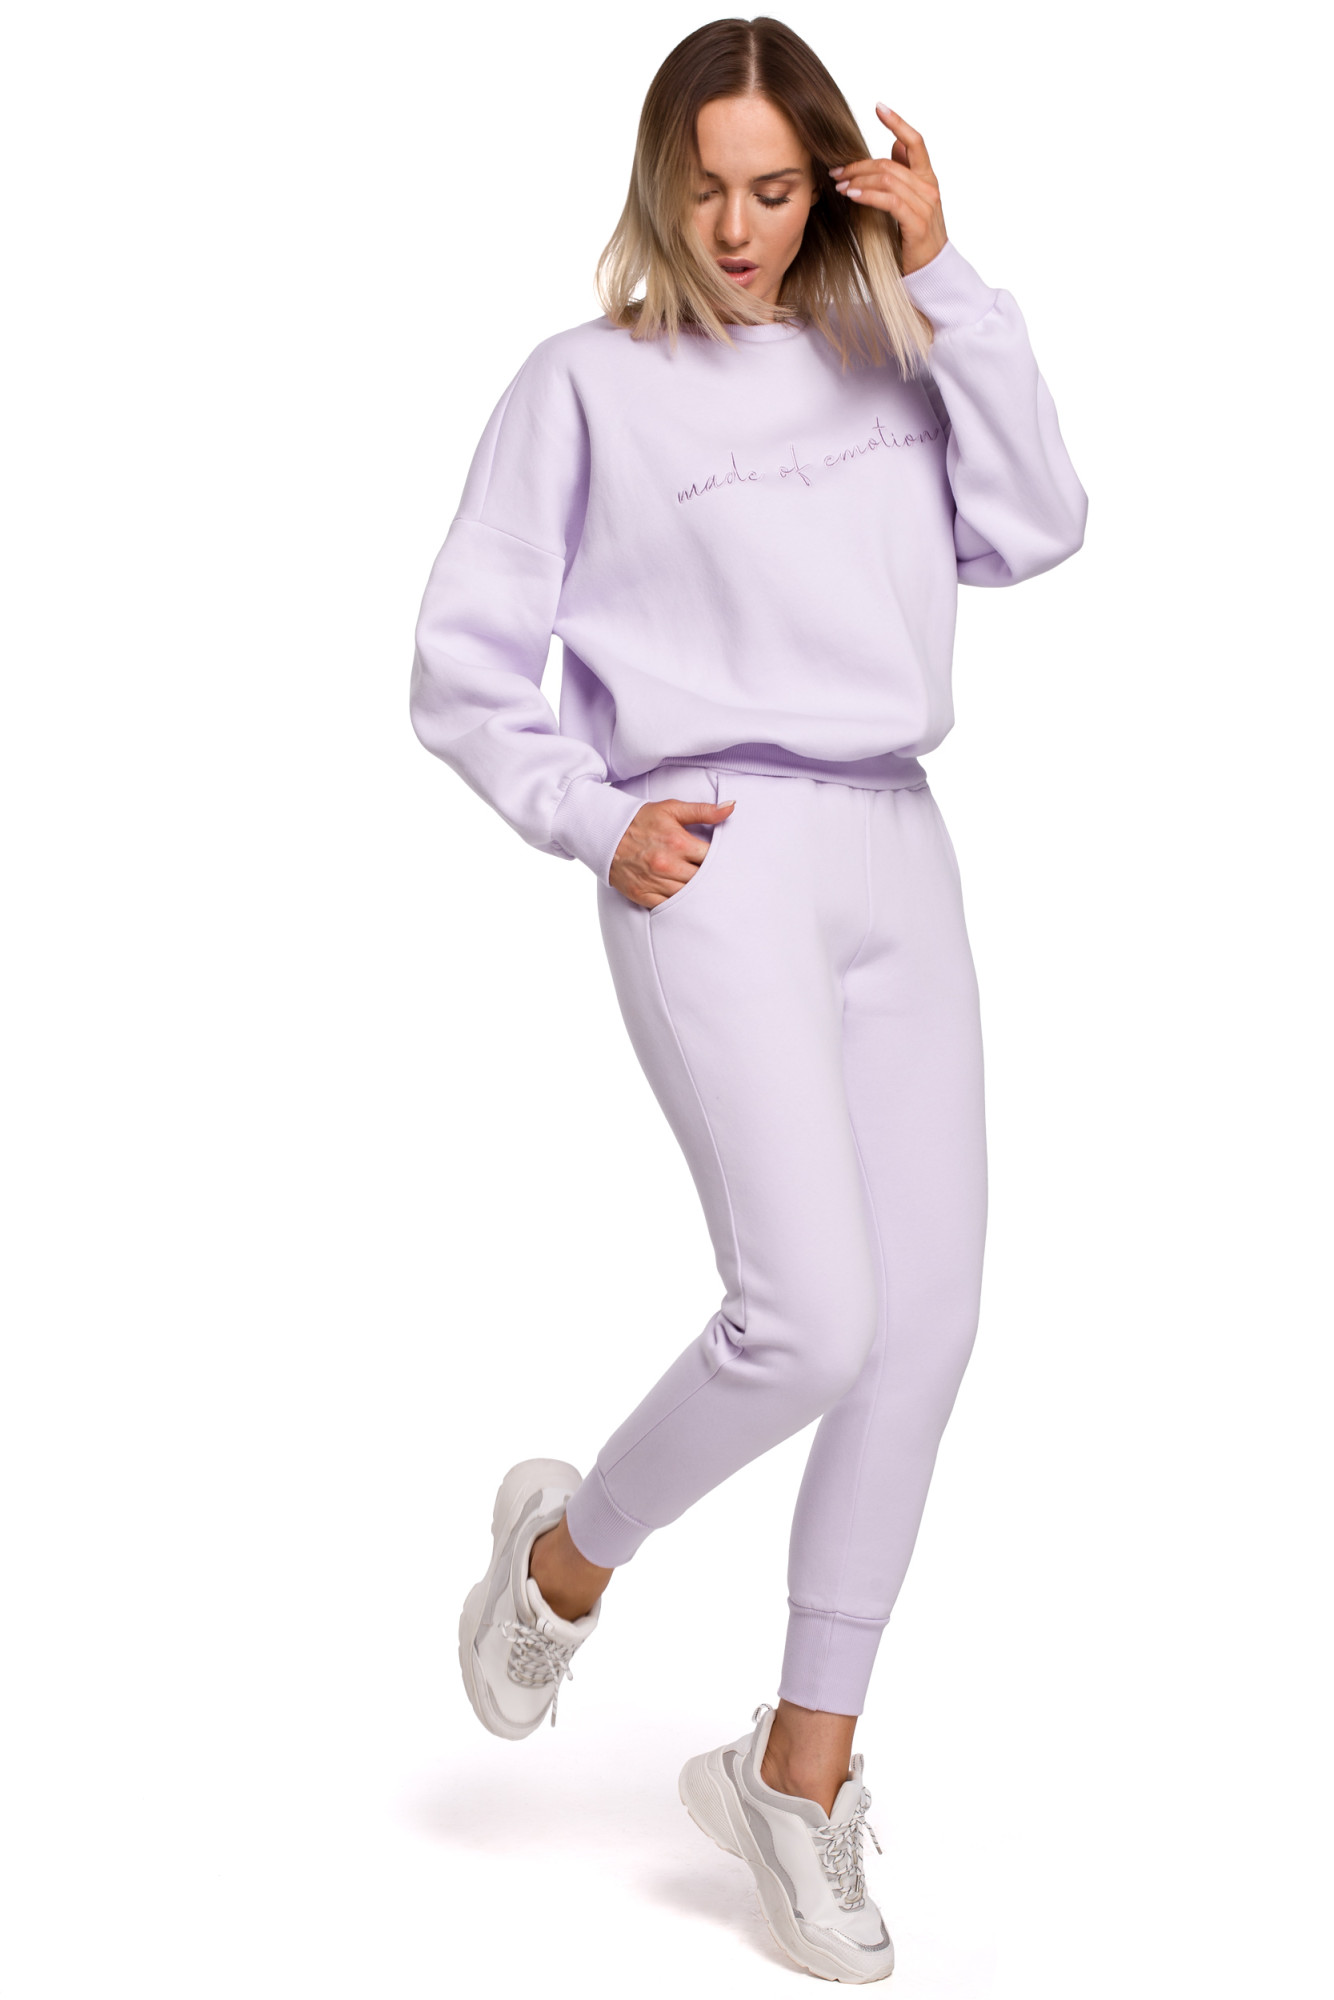 Mikina Made Of Emotion M536 Lilac L/XL